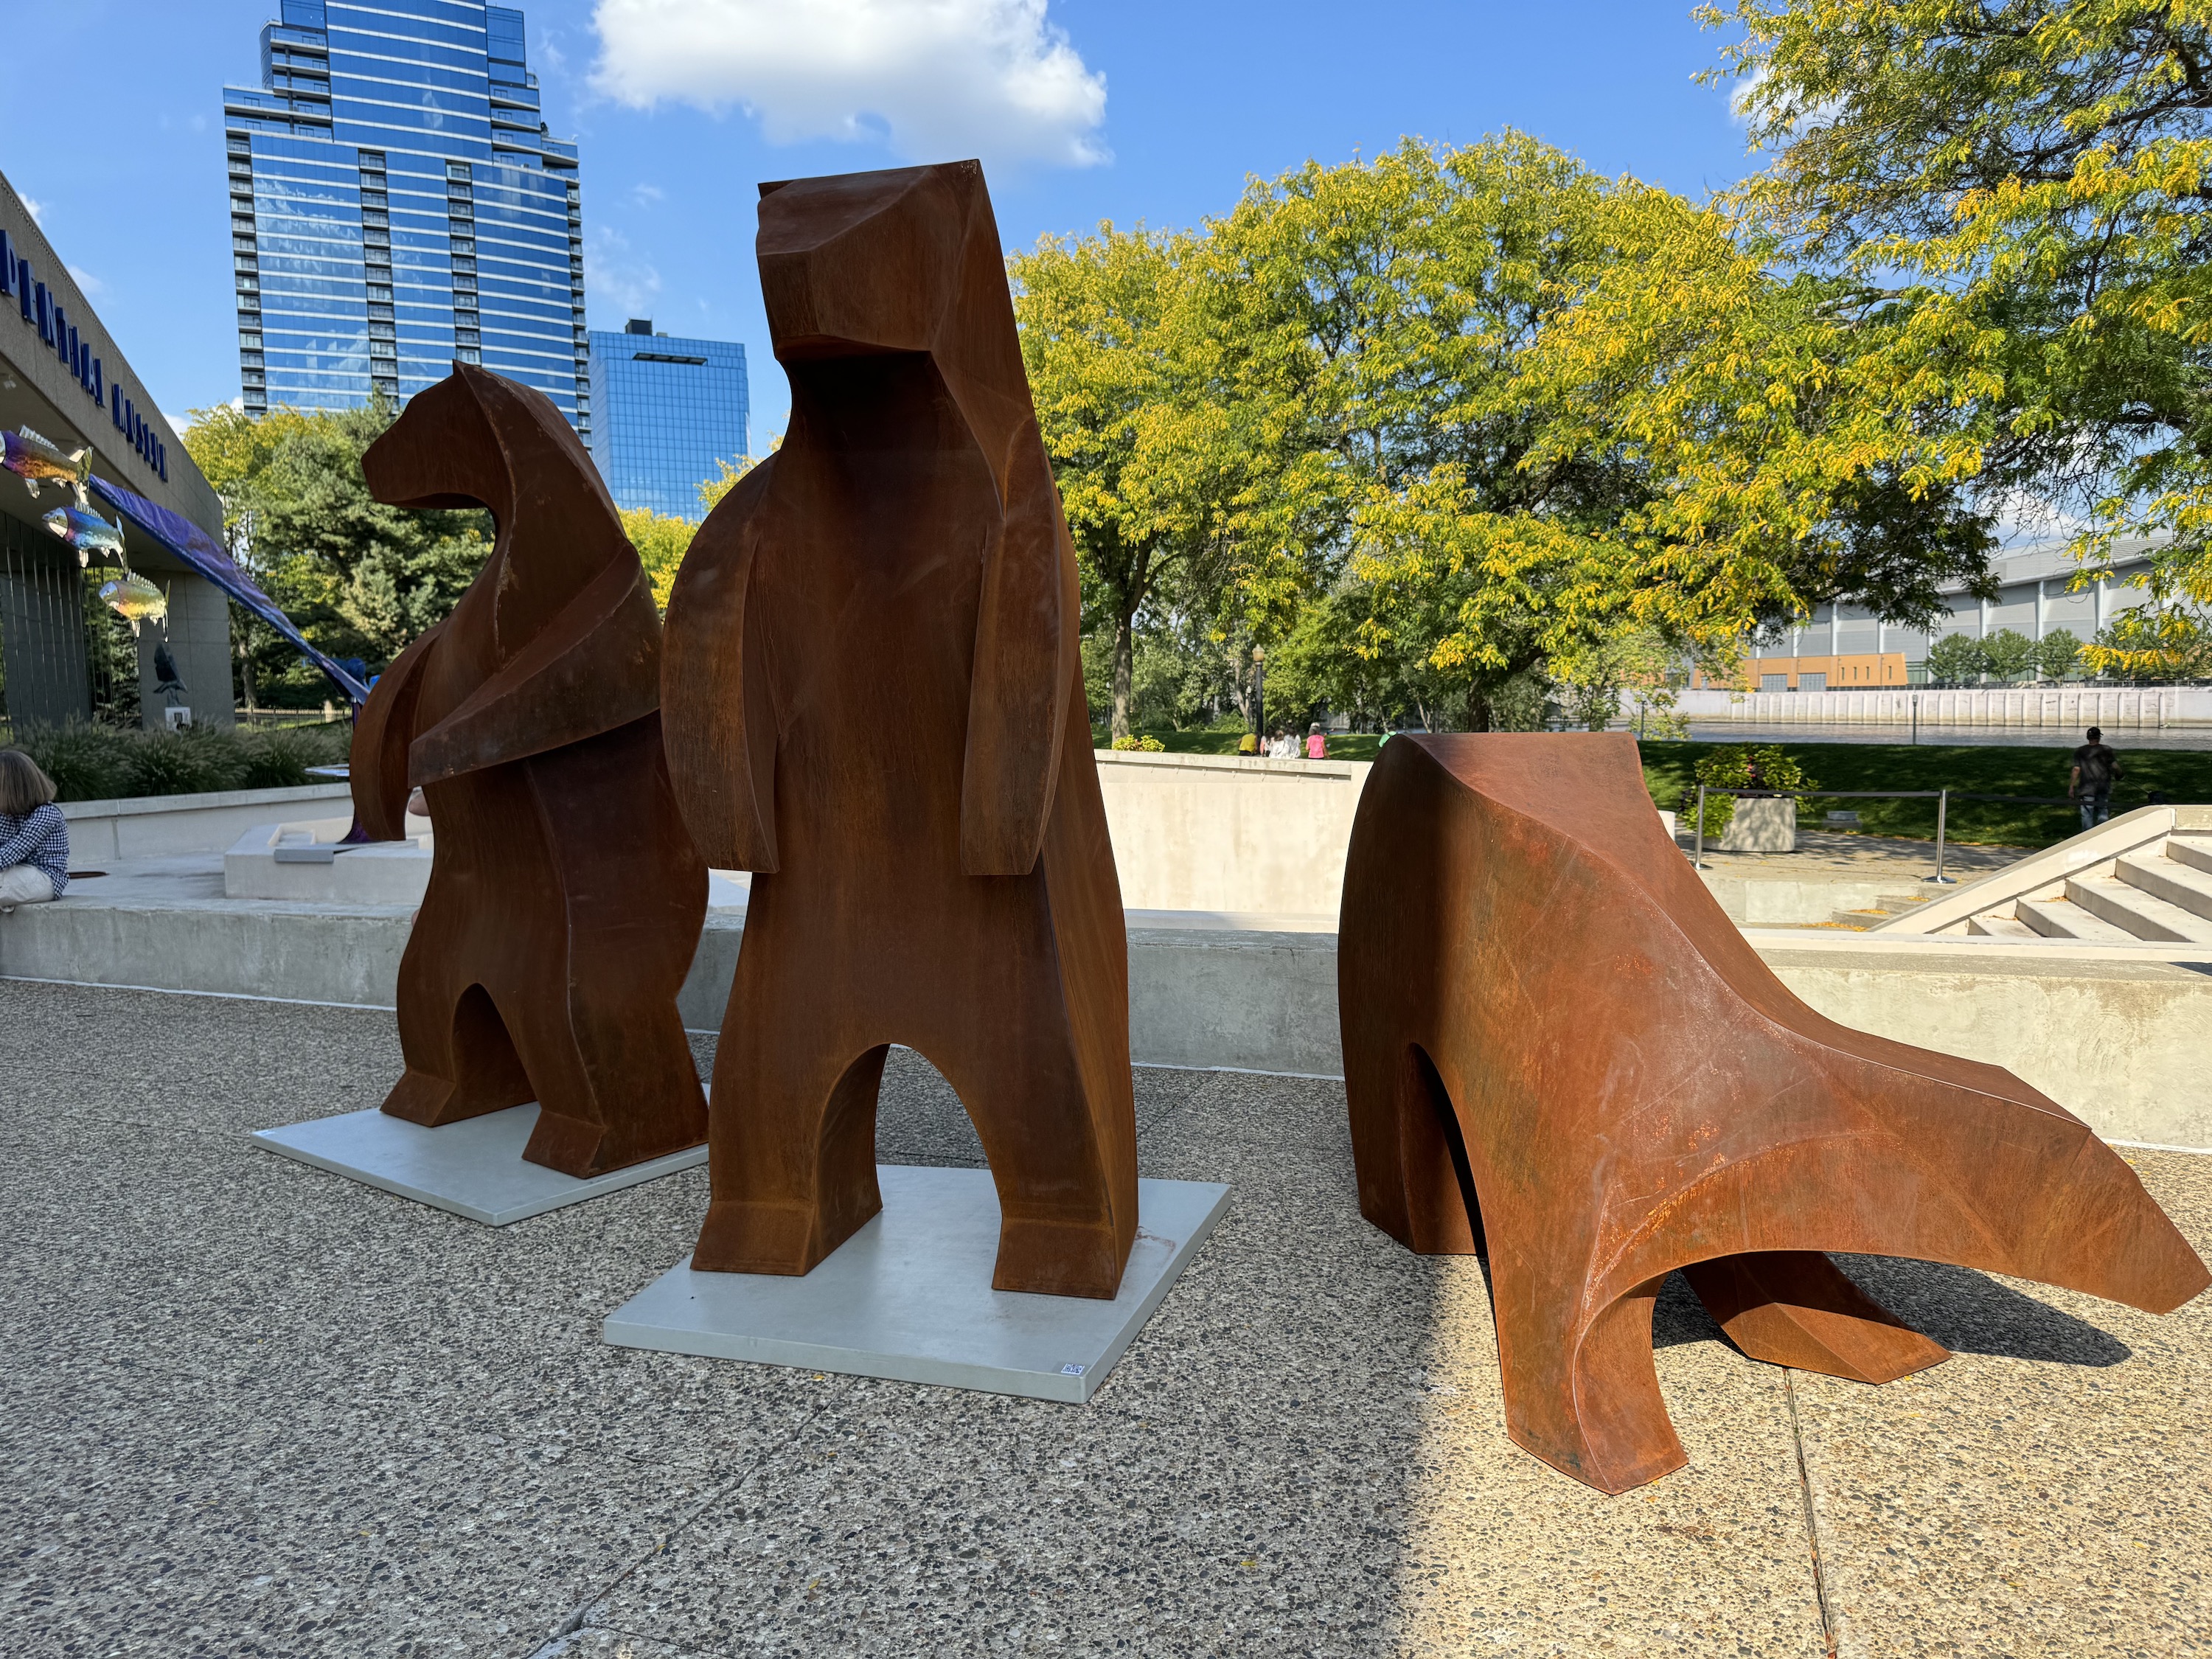 Photo from the iPhone 15 Pro Max main camera of three wooden bears.